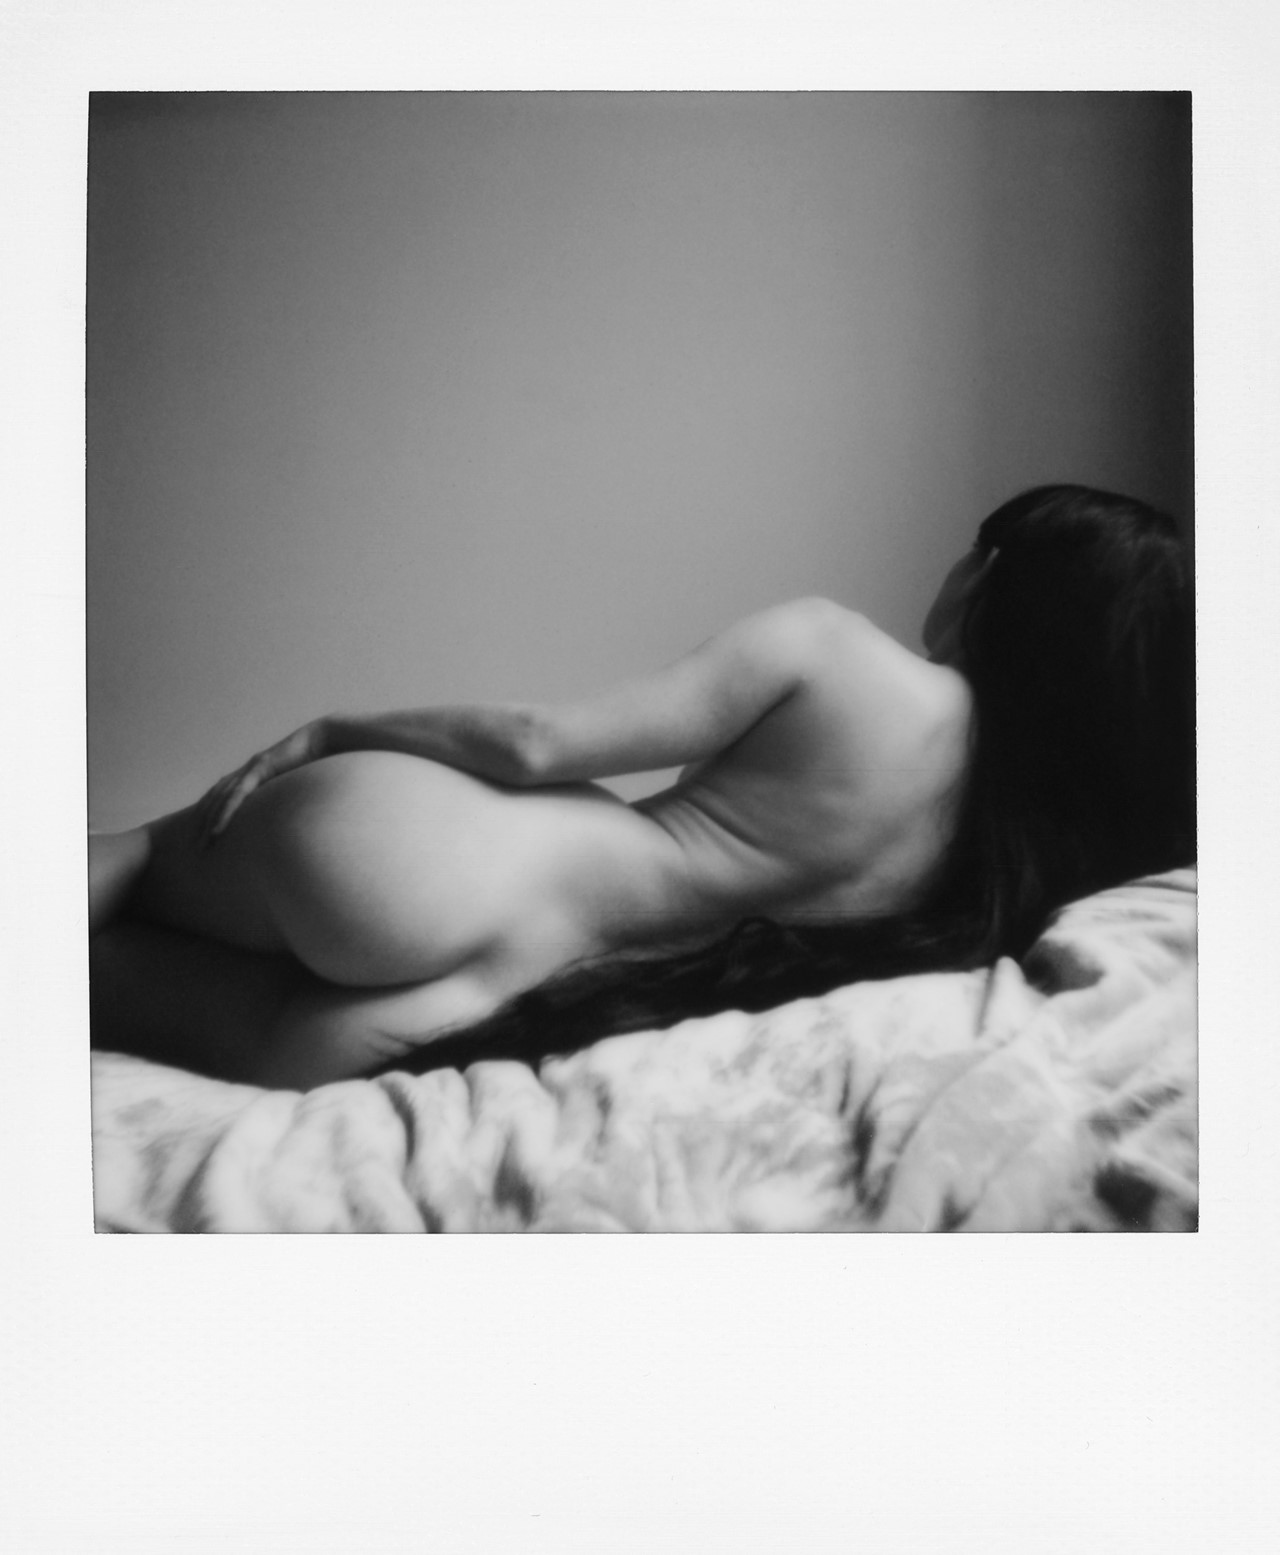 A Series of Intimate Nude Polaroids Taken During Lockdown AnOther